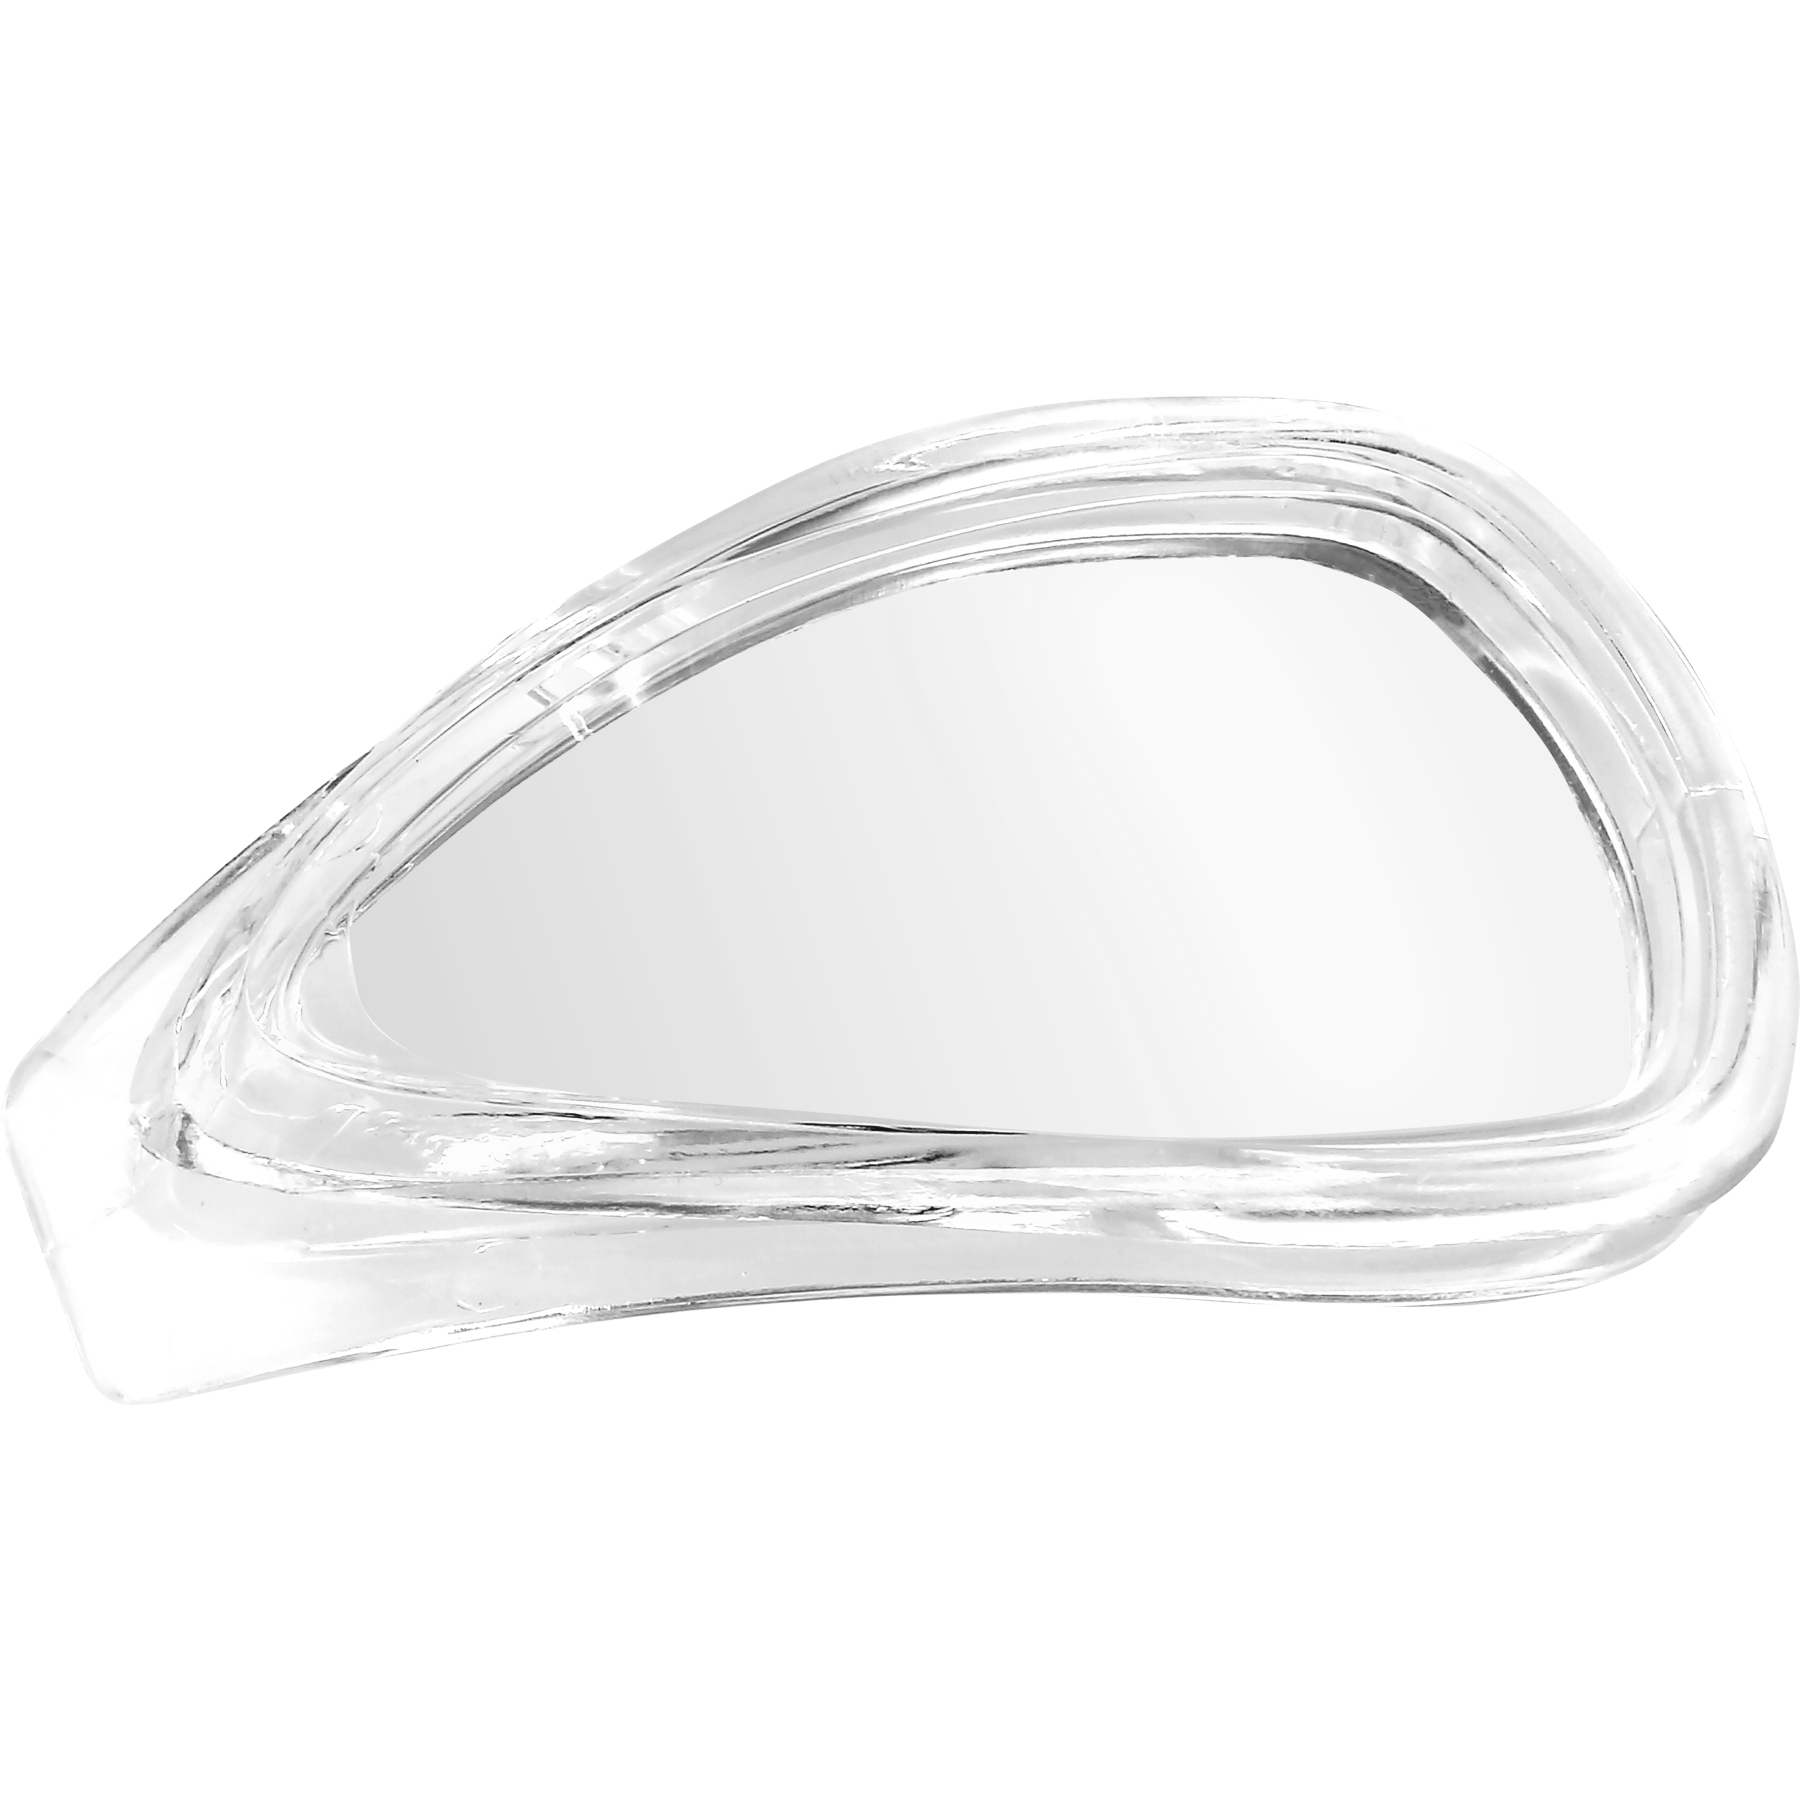 Image of AQUASPHERE Eagle.A Optical Lens - Clear - Transparent -4.5 Diopters